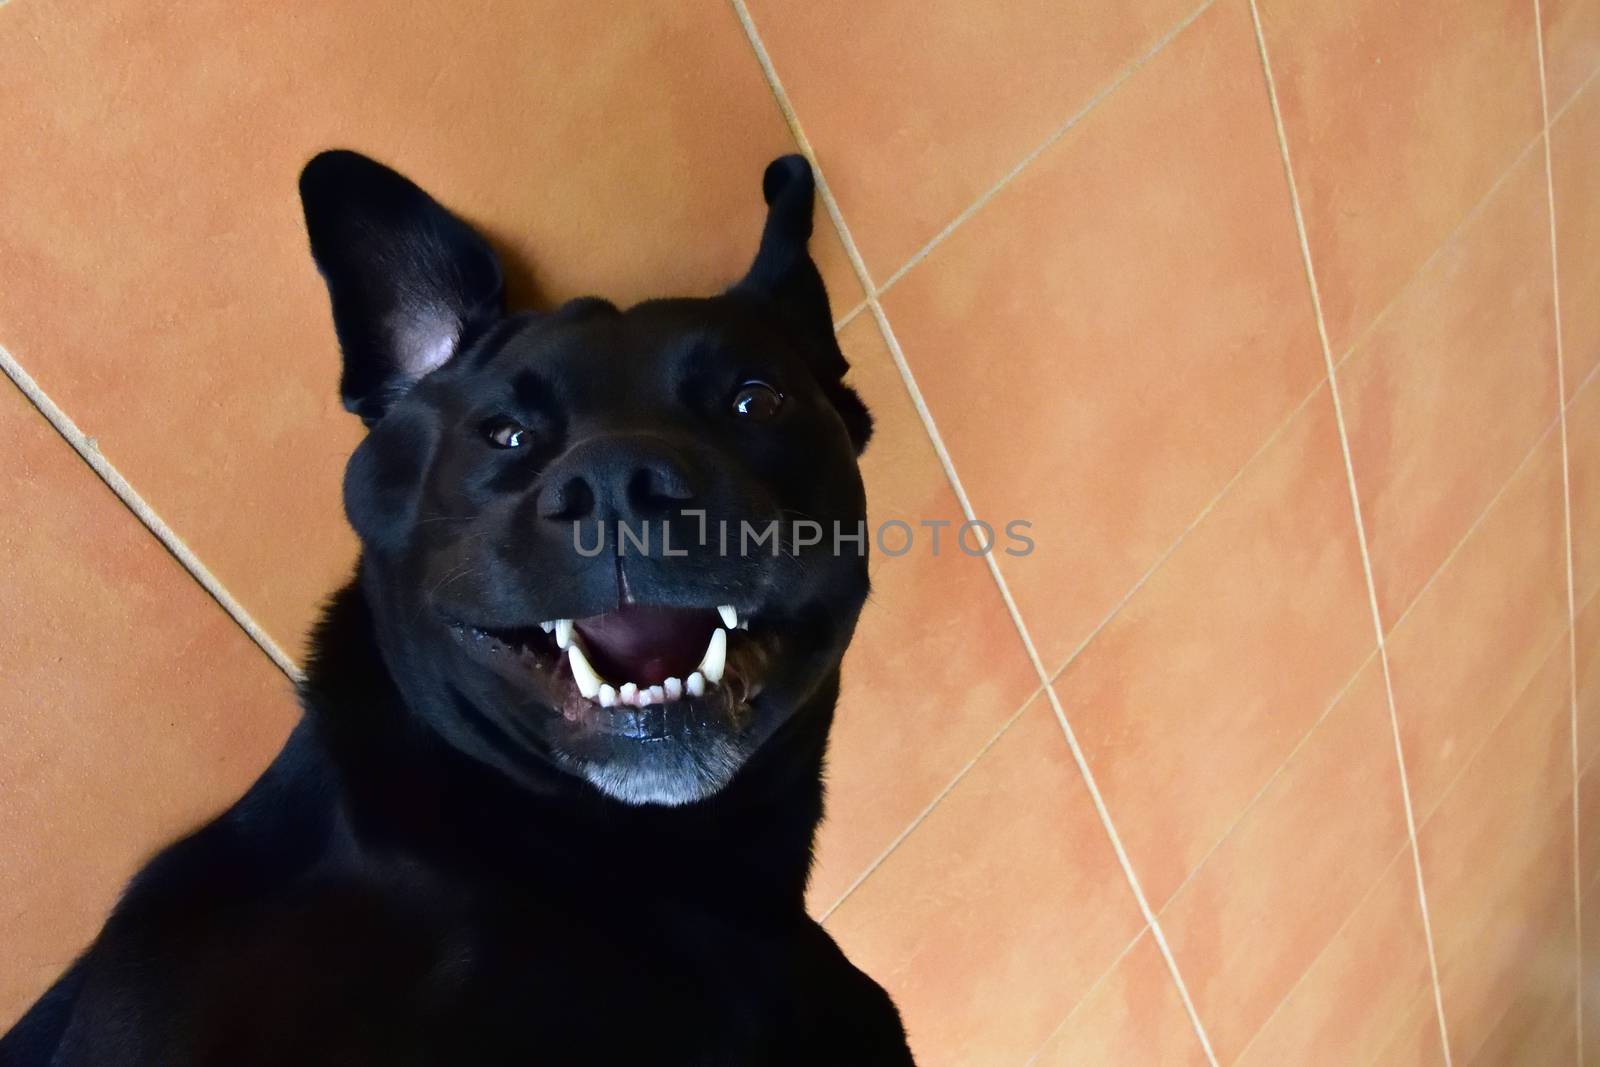 A black Labrador smiling while getting a well-deserved belly rub.